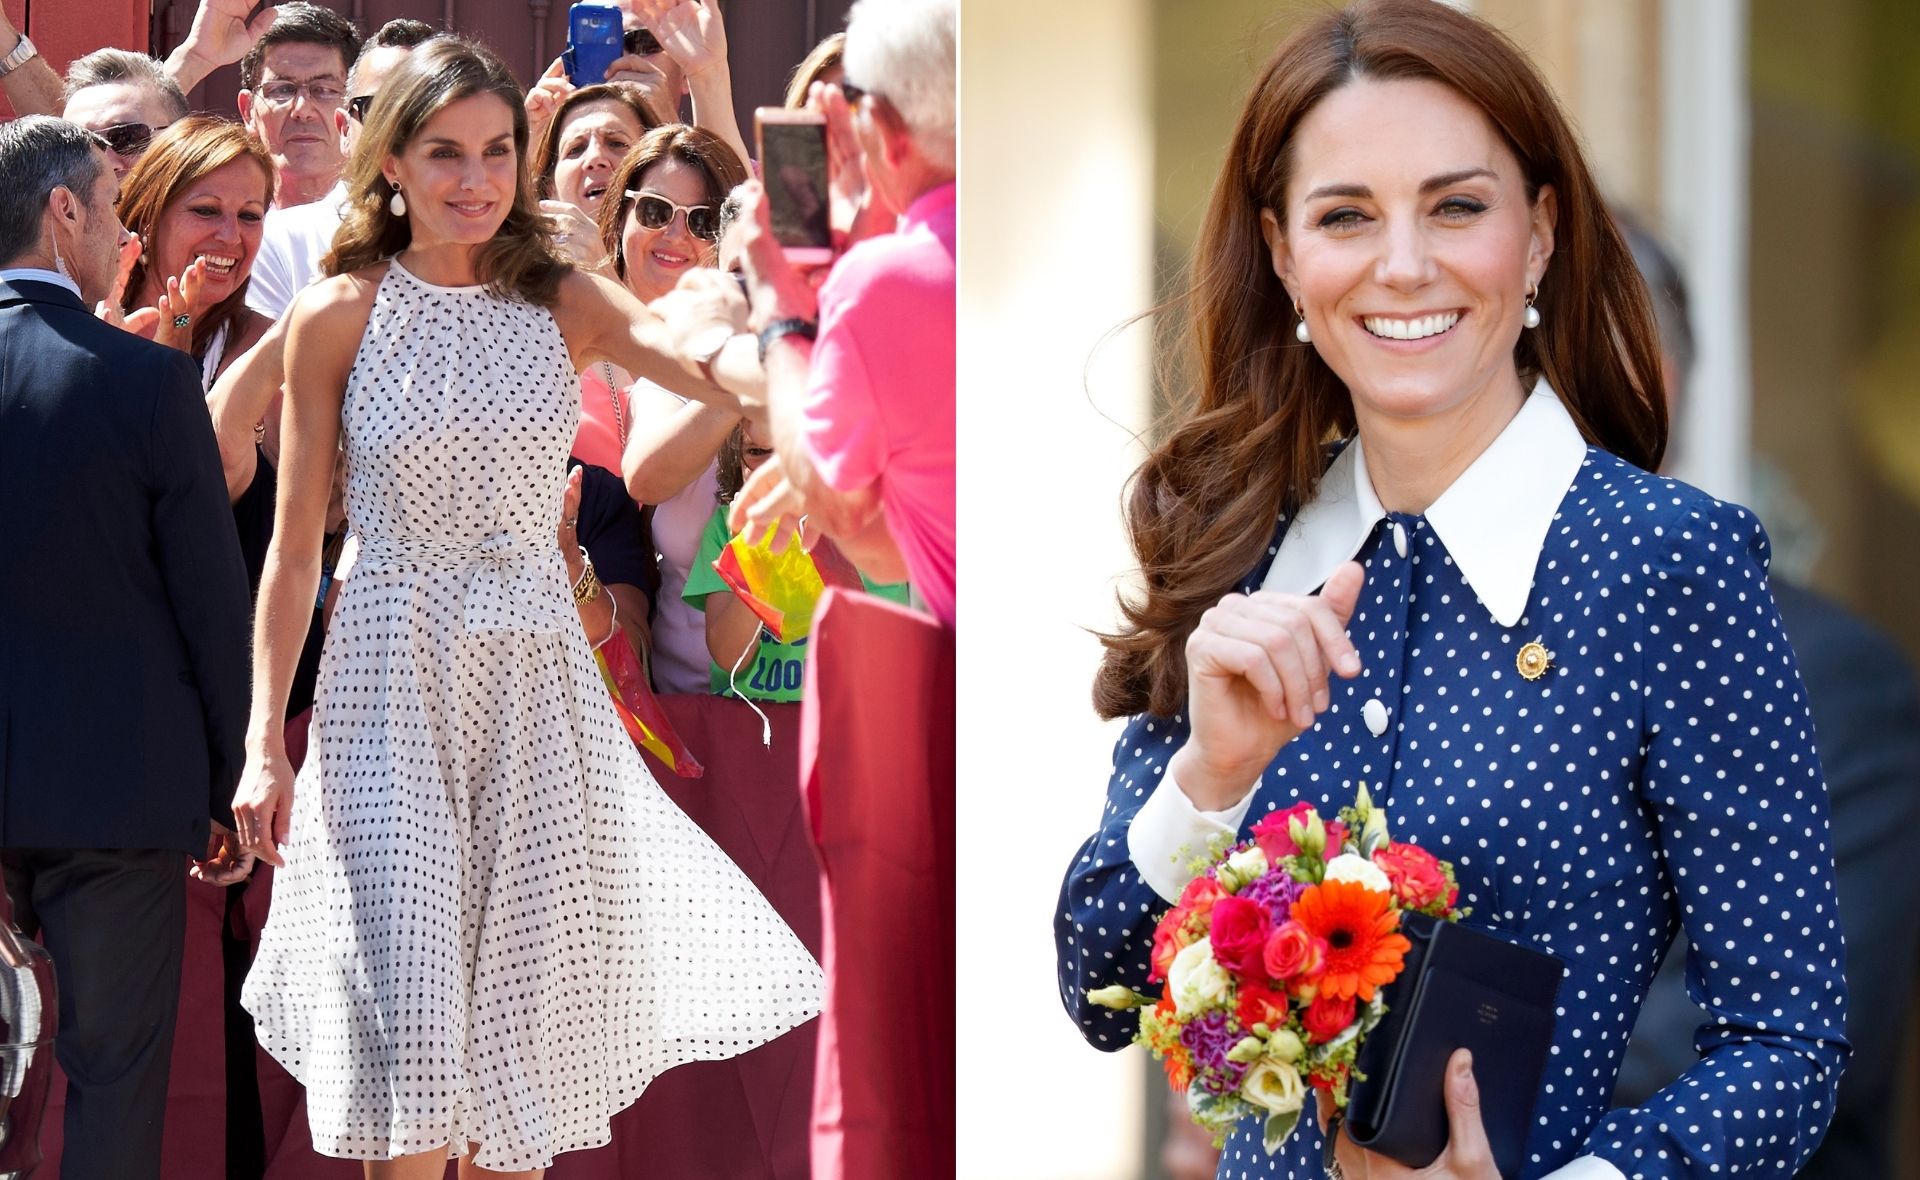 From Kate Middleton’s refined midi skirt to Princess Diana’s fun ’80s look, polka dots are the spring royal trend we’re going dotty over